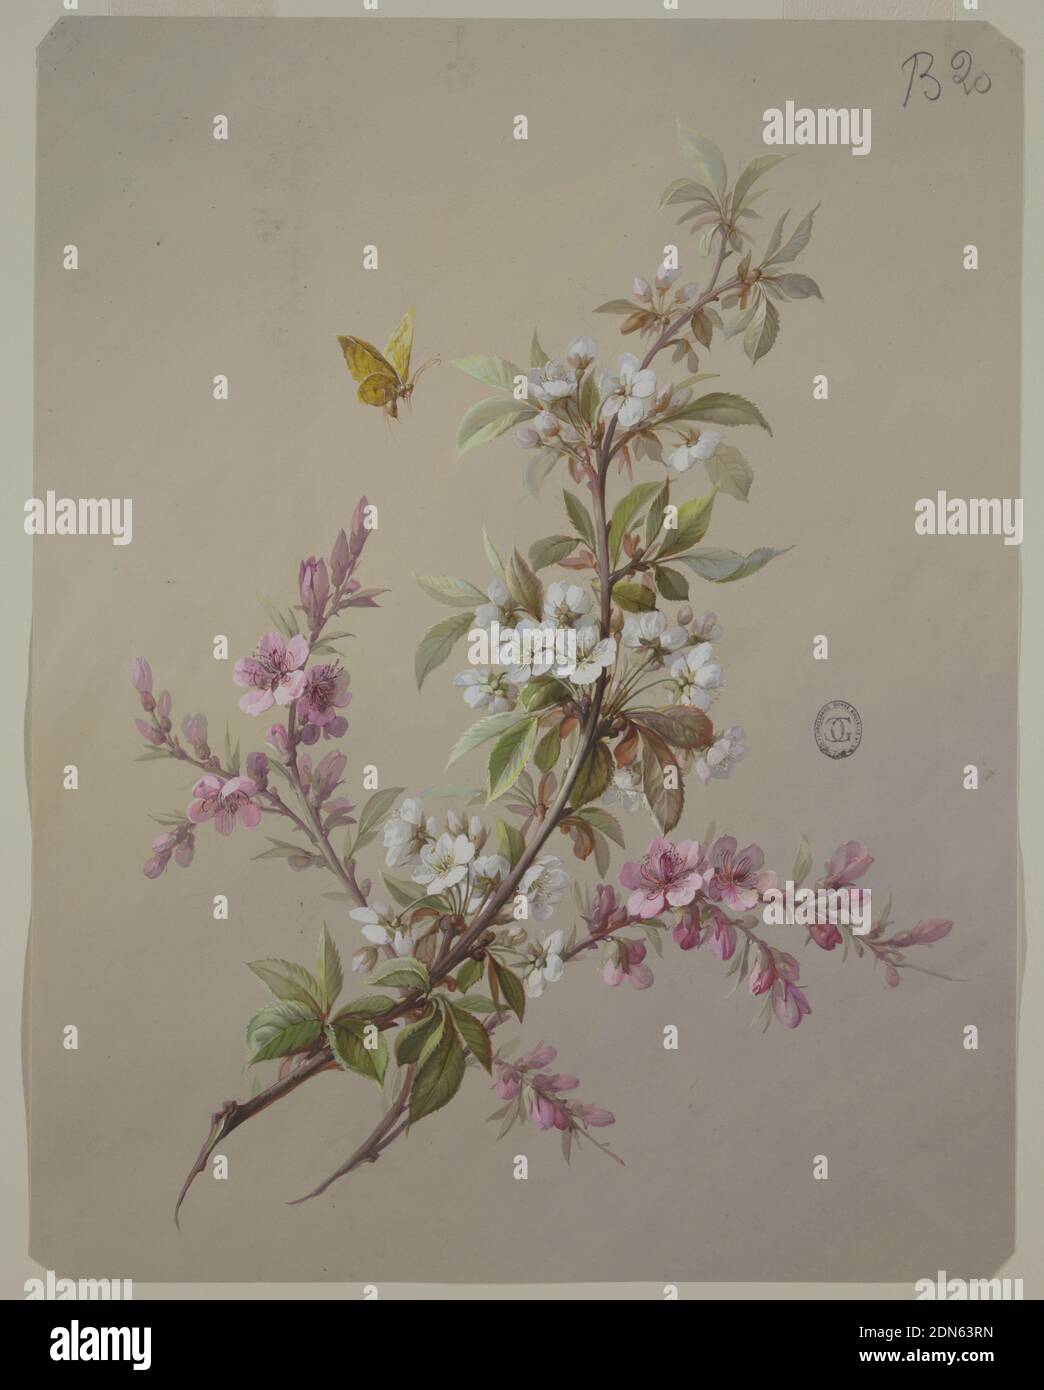 Design for Wallpaper and Textiles: Flowers and Birds, Brush and gouache on beige paper, Branch with clusters of white flowers and foliage, placed diagonally, top towards the right. Toward bottom of branch, two more branches of purple flowers cross and extend beyond white branch on either side. A yellow butterfly flies towards the upper left of the white branch., France, 19th century, wallpaper designs, Drawing Stock Photo